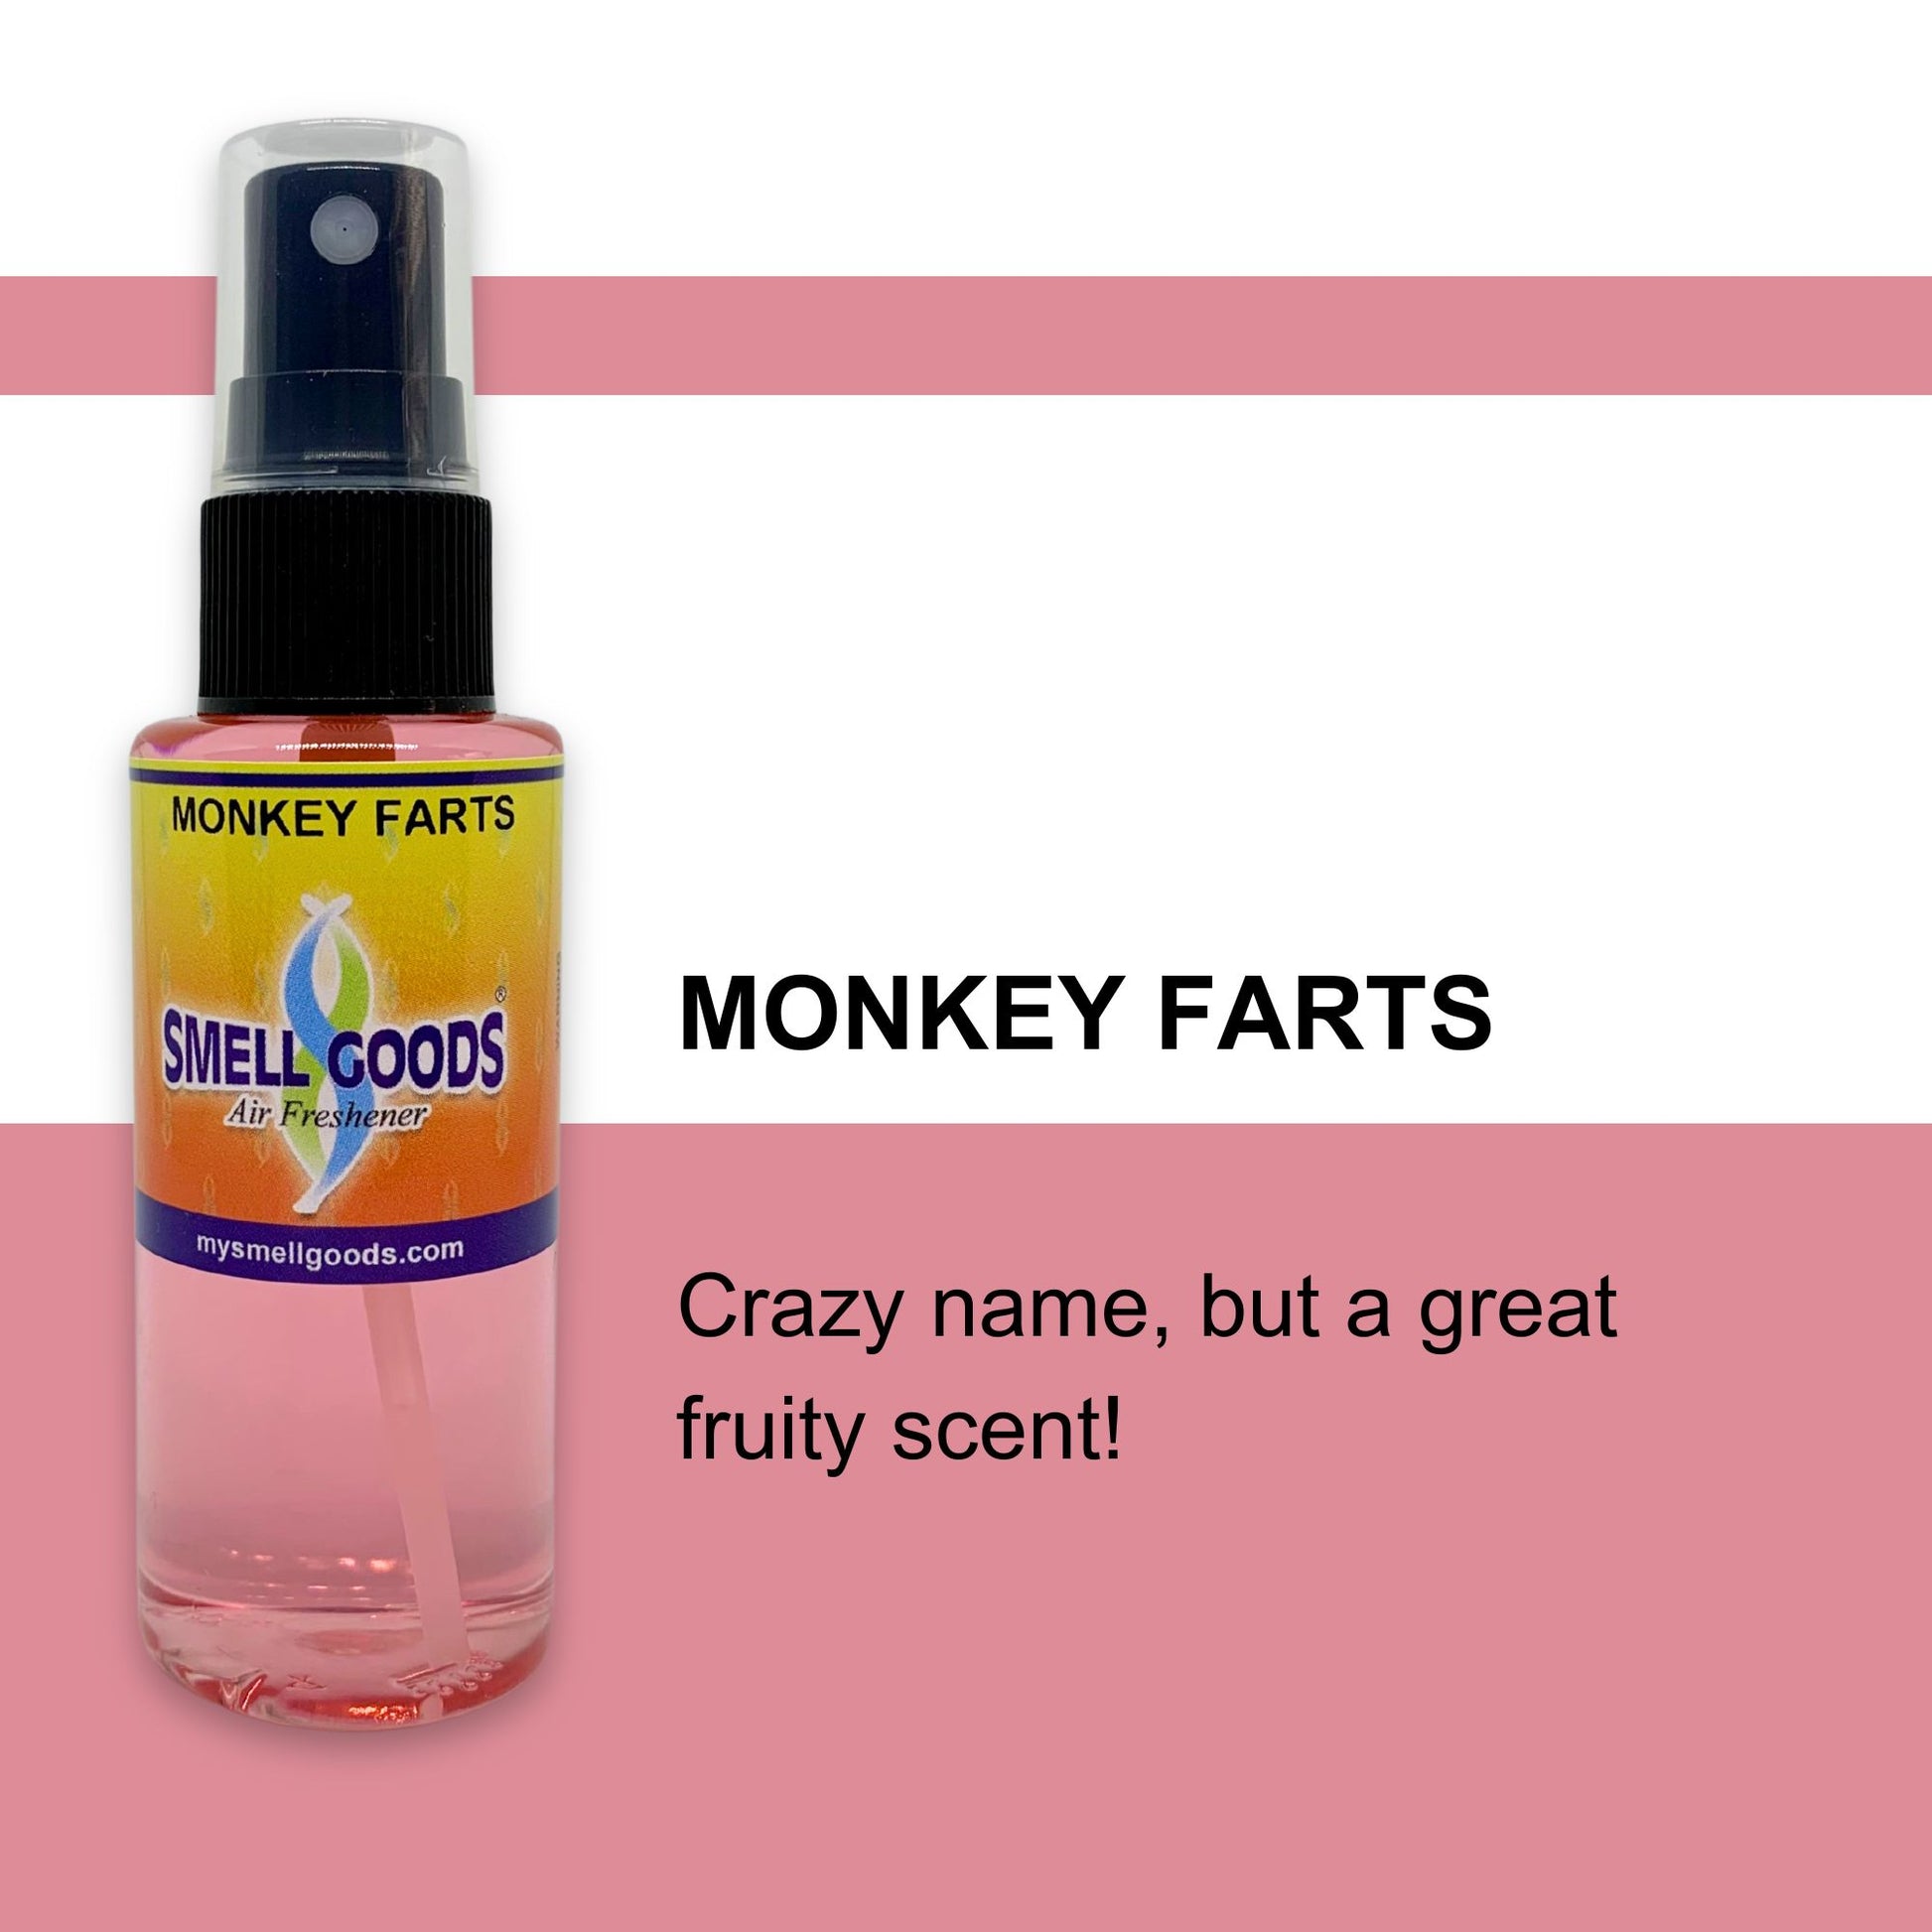 Monkey Farts Air Freshener by Smell Goods